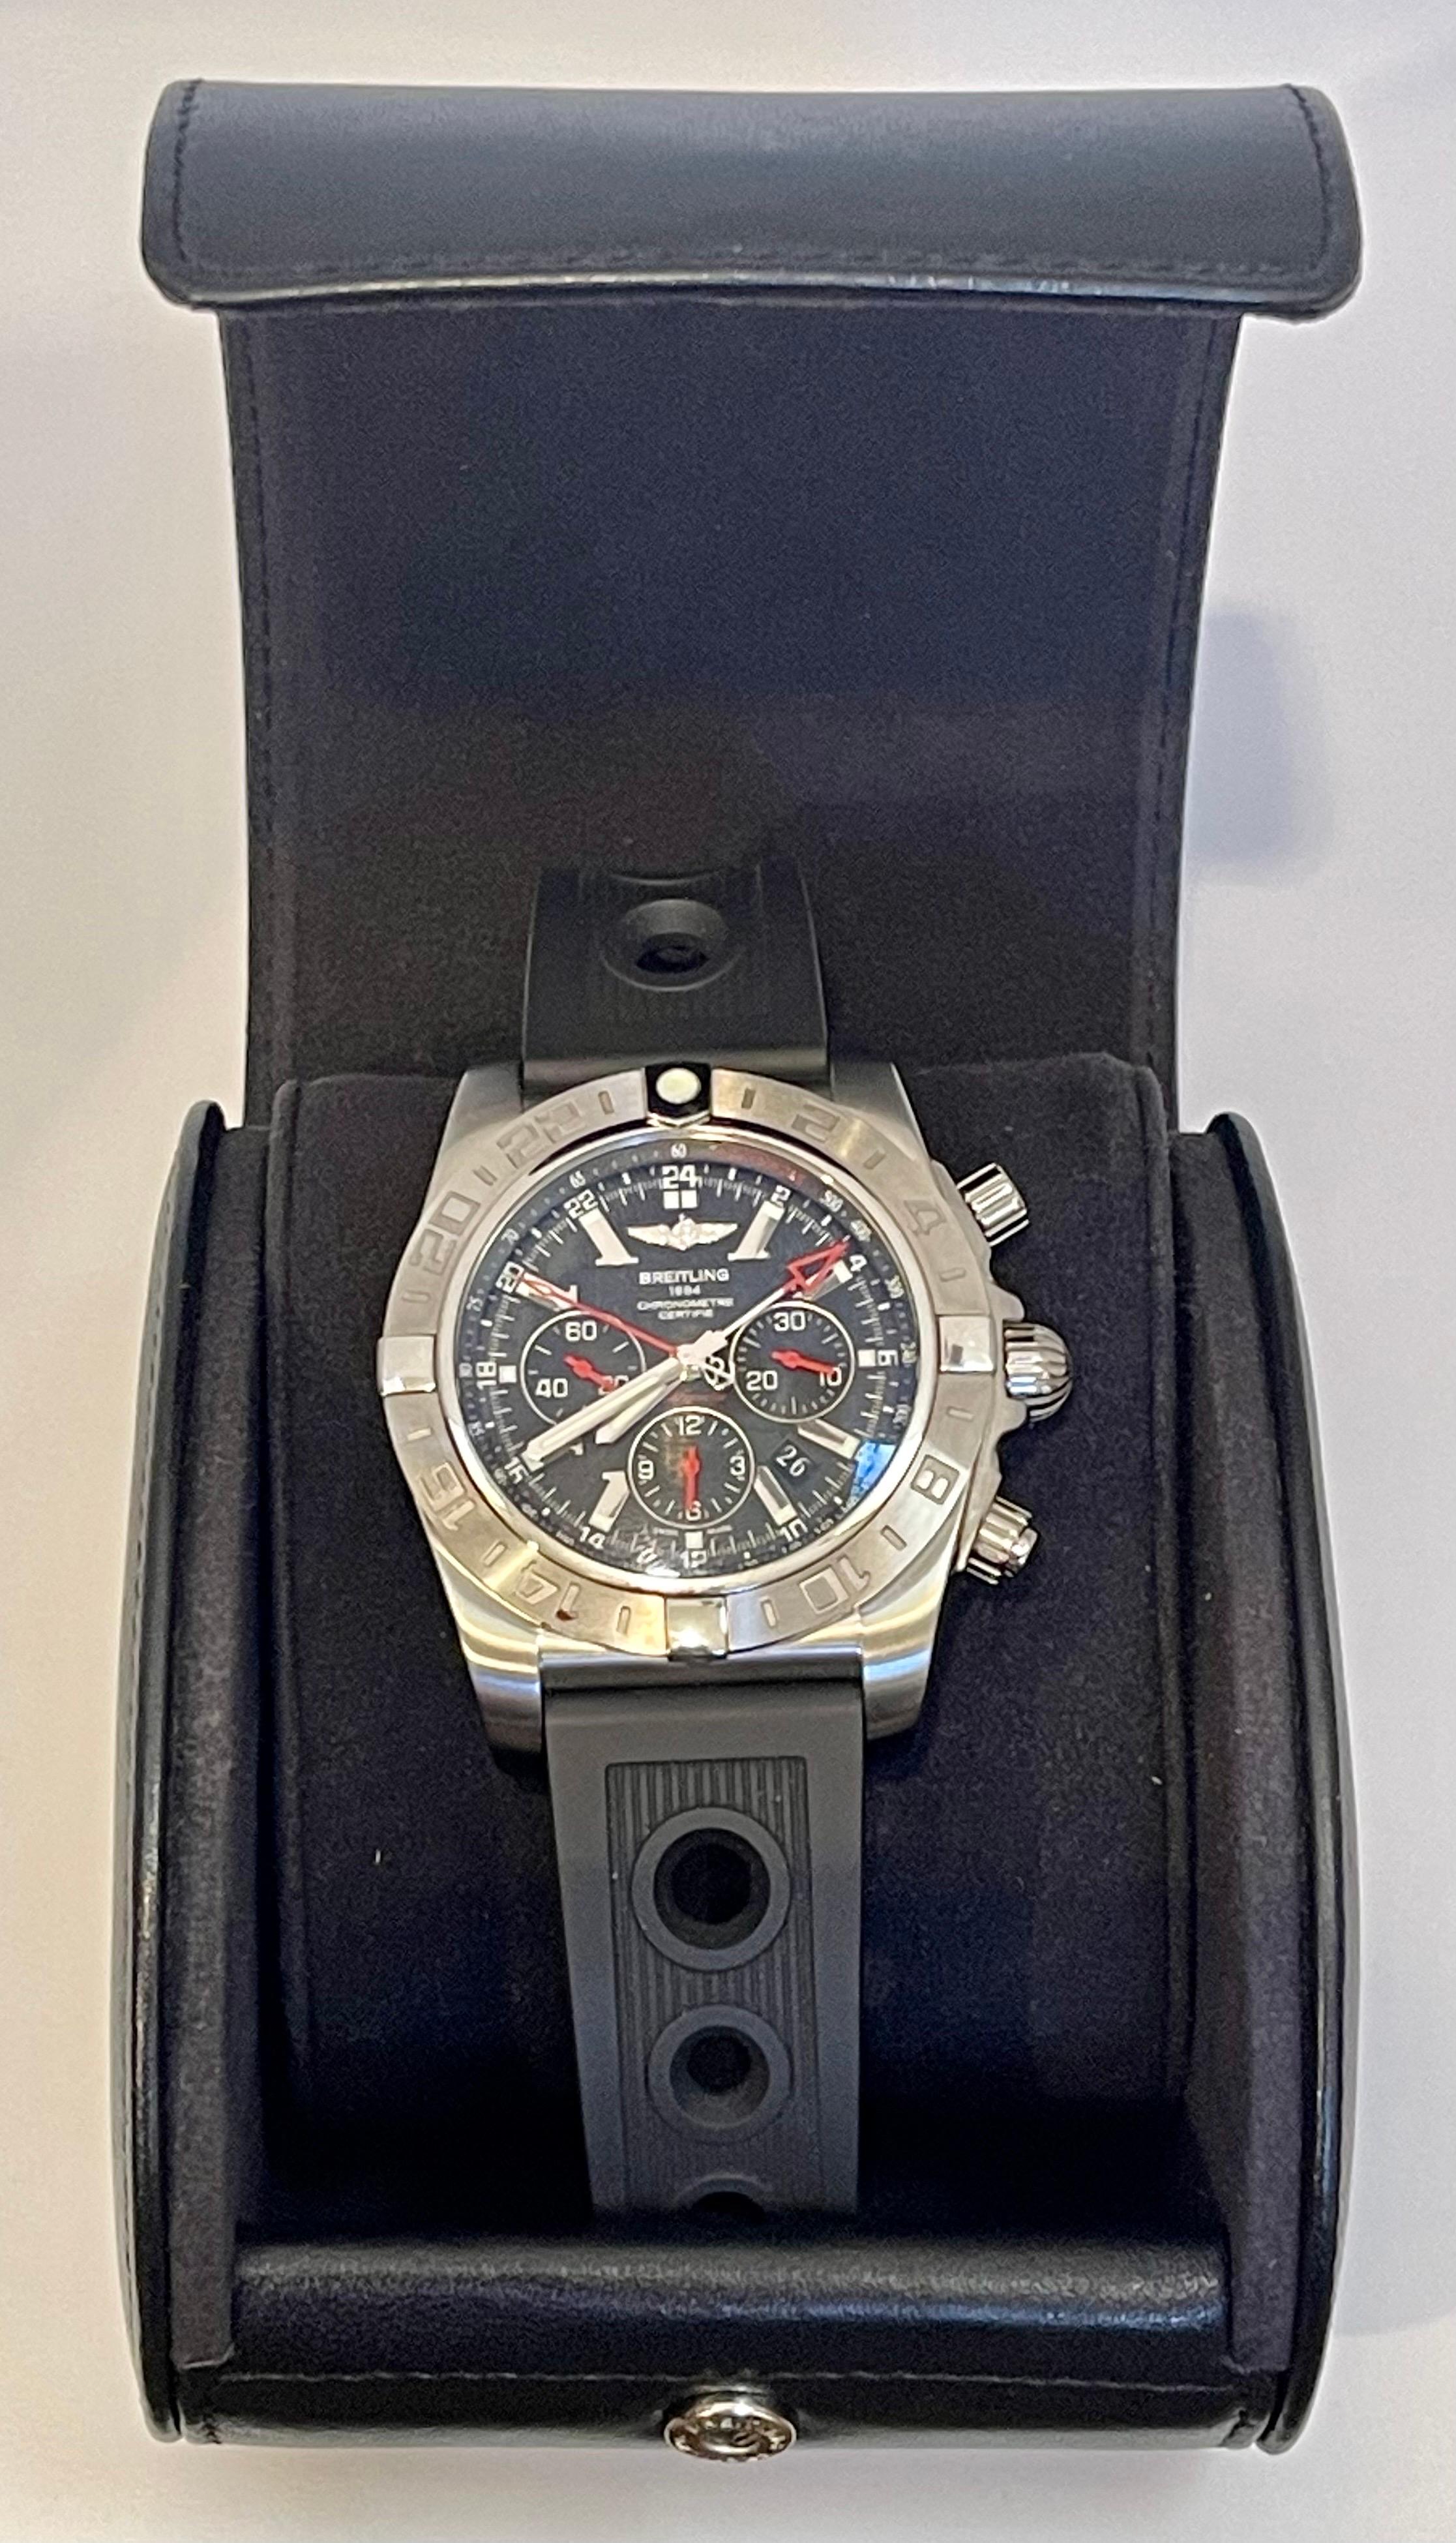 Breitling Super Avenger Chrono Limited Edition Black PVD Steel Rare, 4004422 For Sale 10